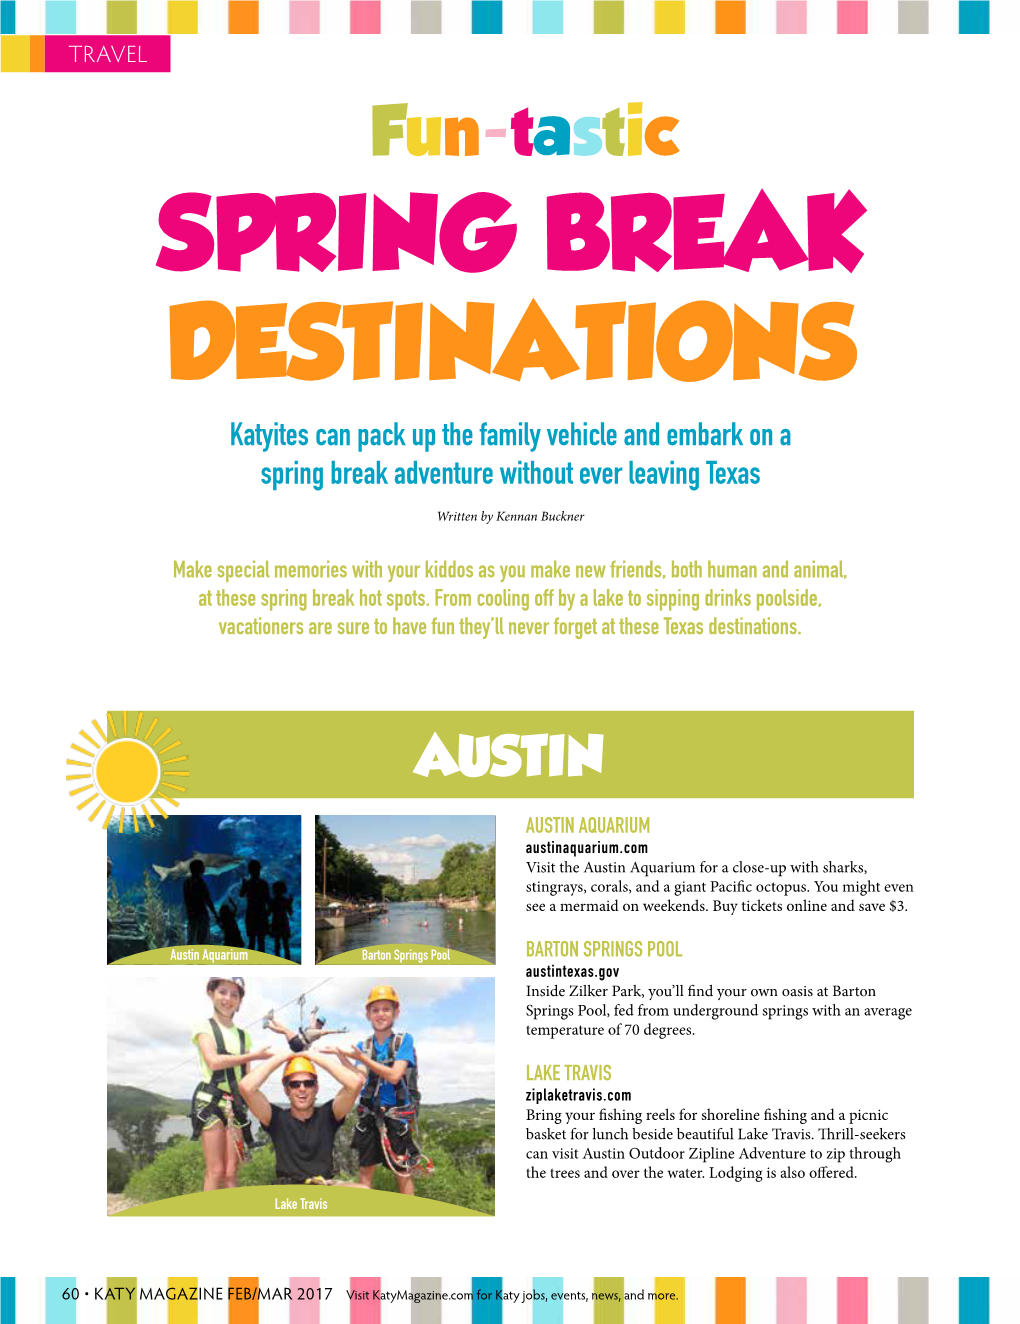 SPRING BREAK DESTINATIONS Katyites Can Pack up the Family Vehicle and Embark on a Spring Break Adventure Without Ever Leaving Texas